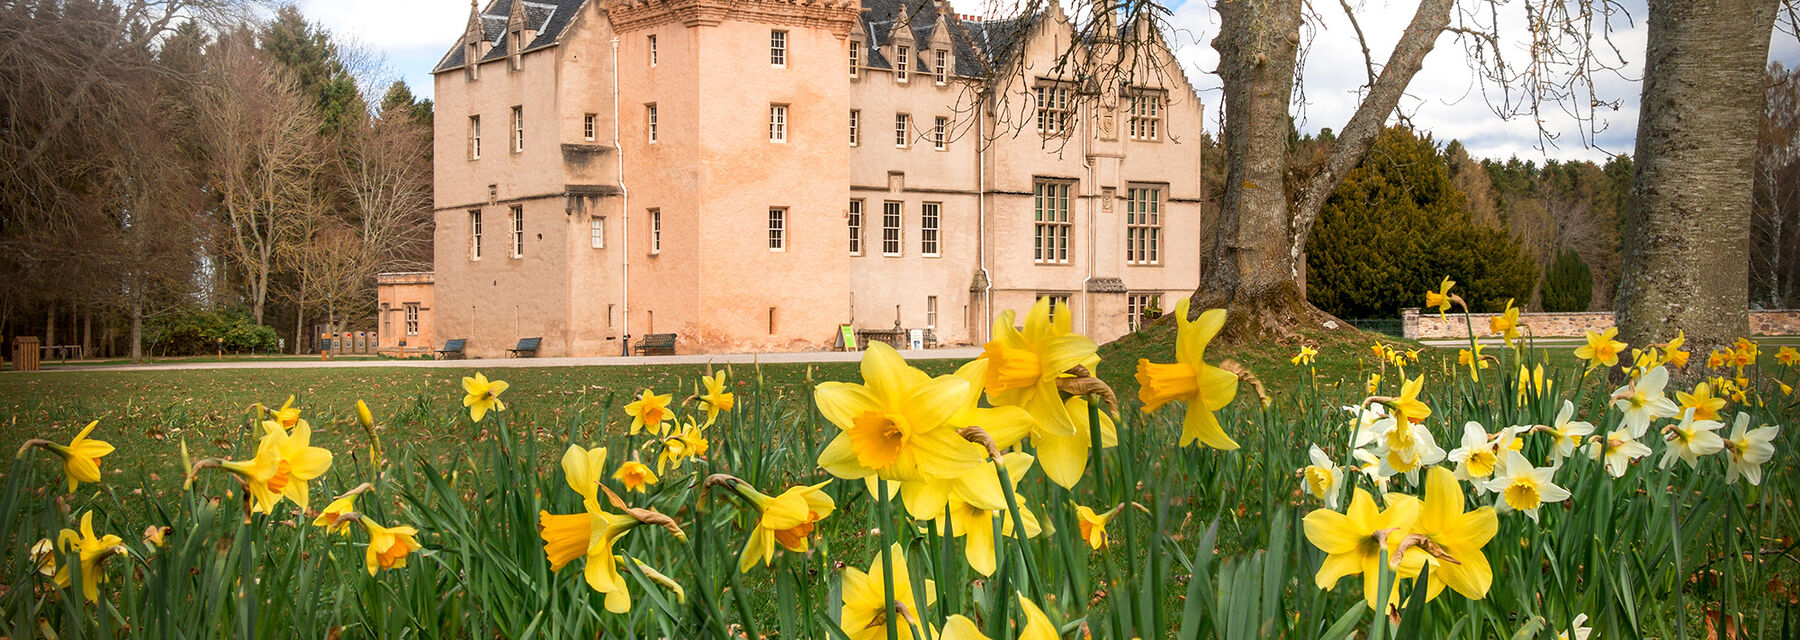 Daffodils in front of Brodie Castle in springtime